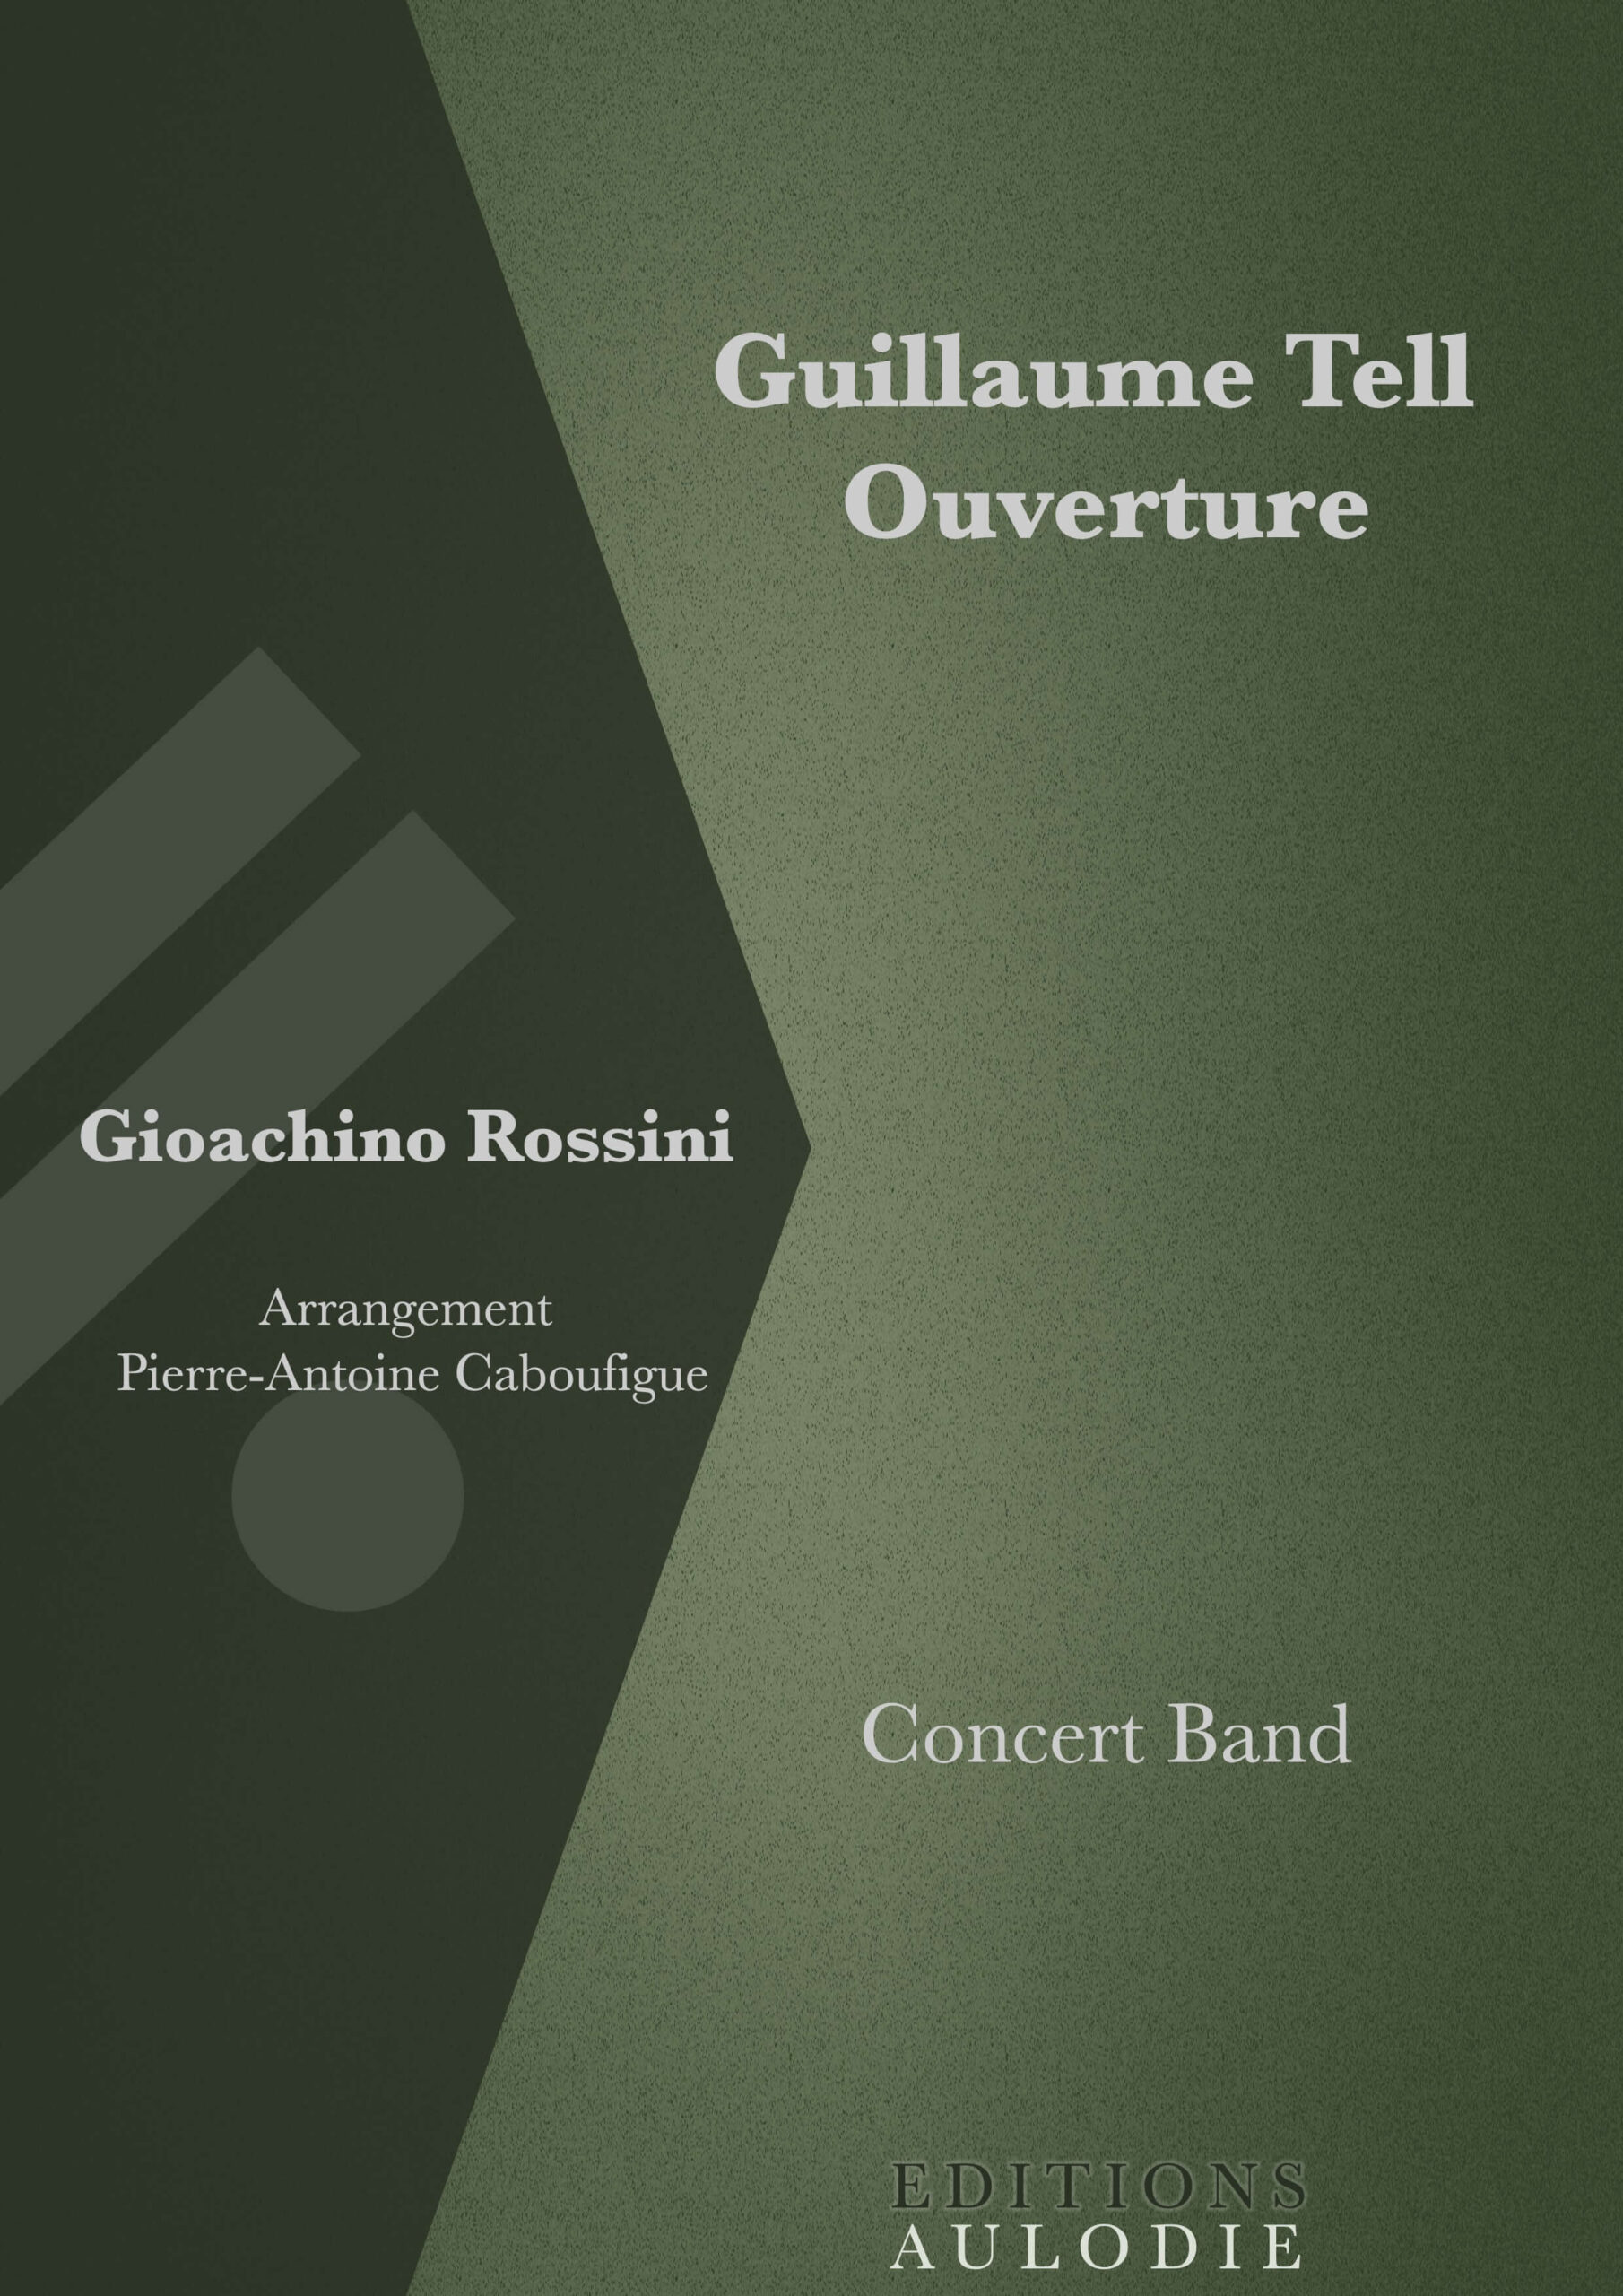 EA01005-Guillaume_Tell_Ouverture-Gioachino_Rossini-Concert_Band